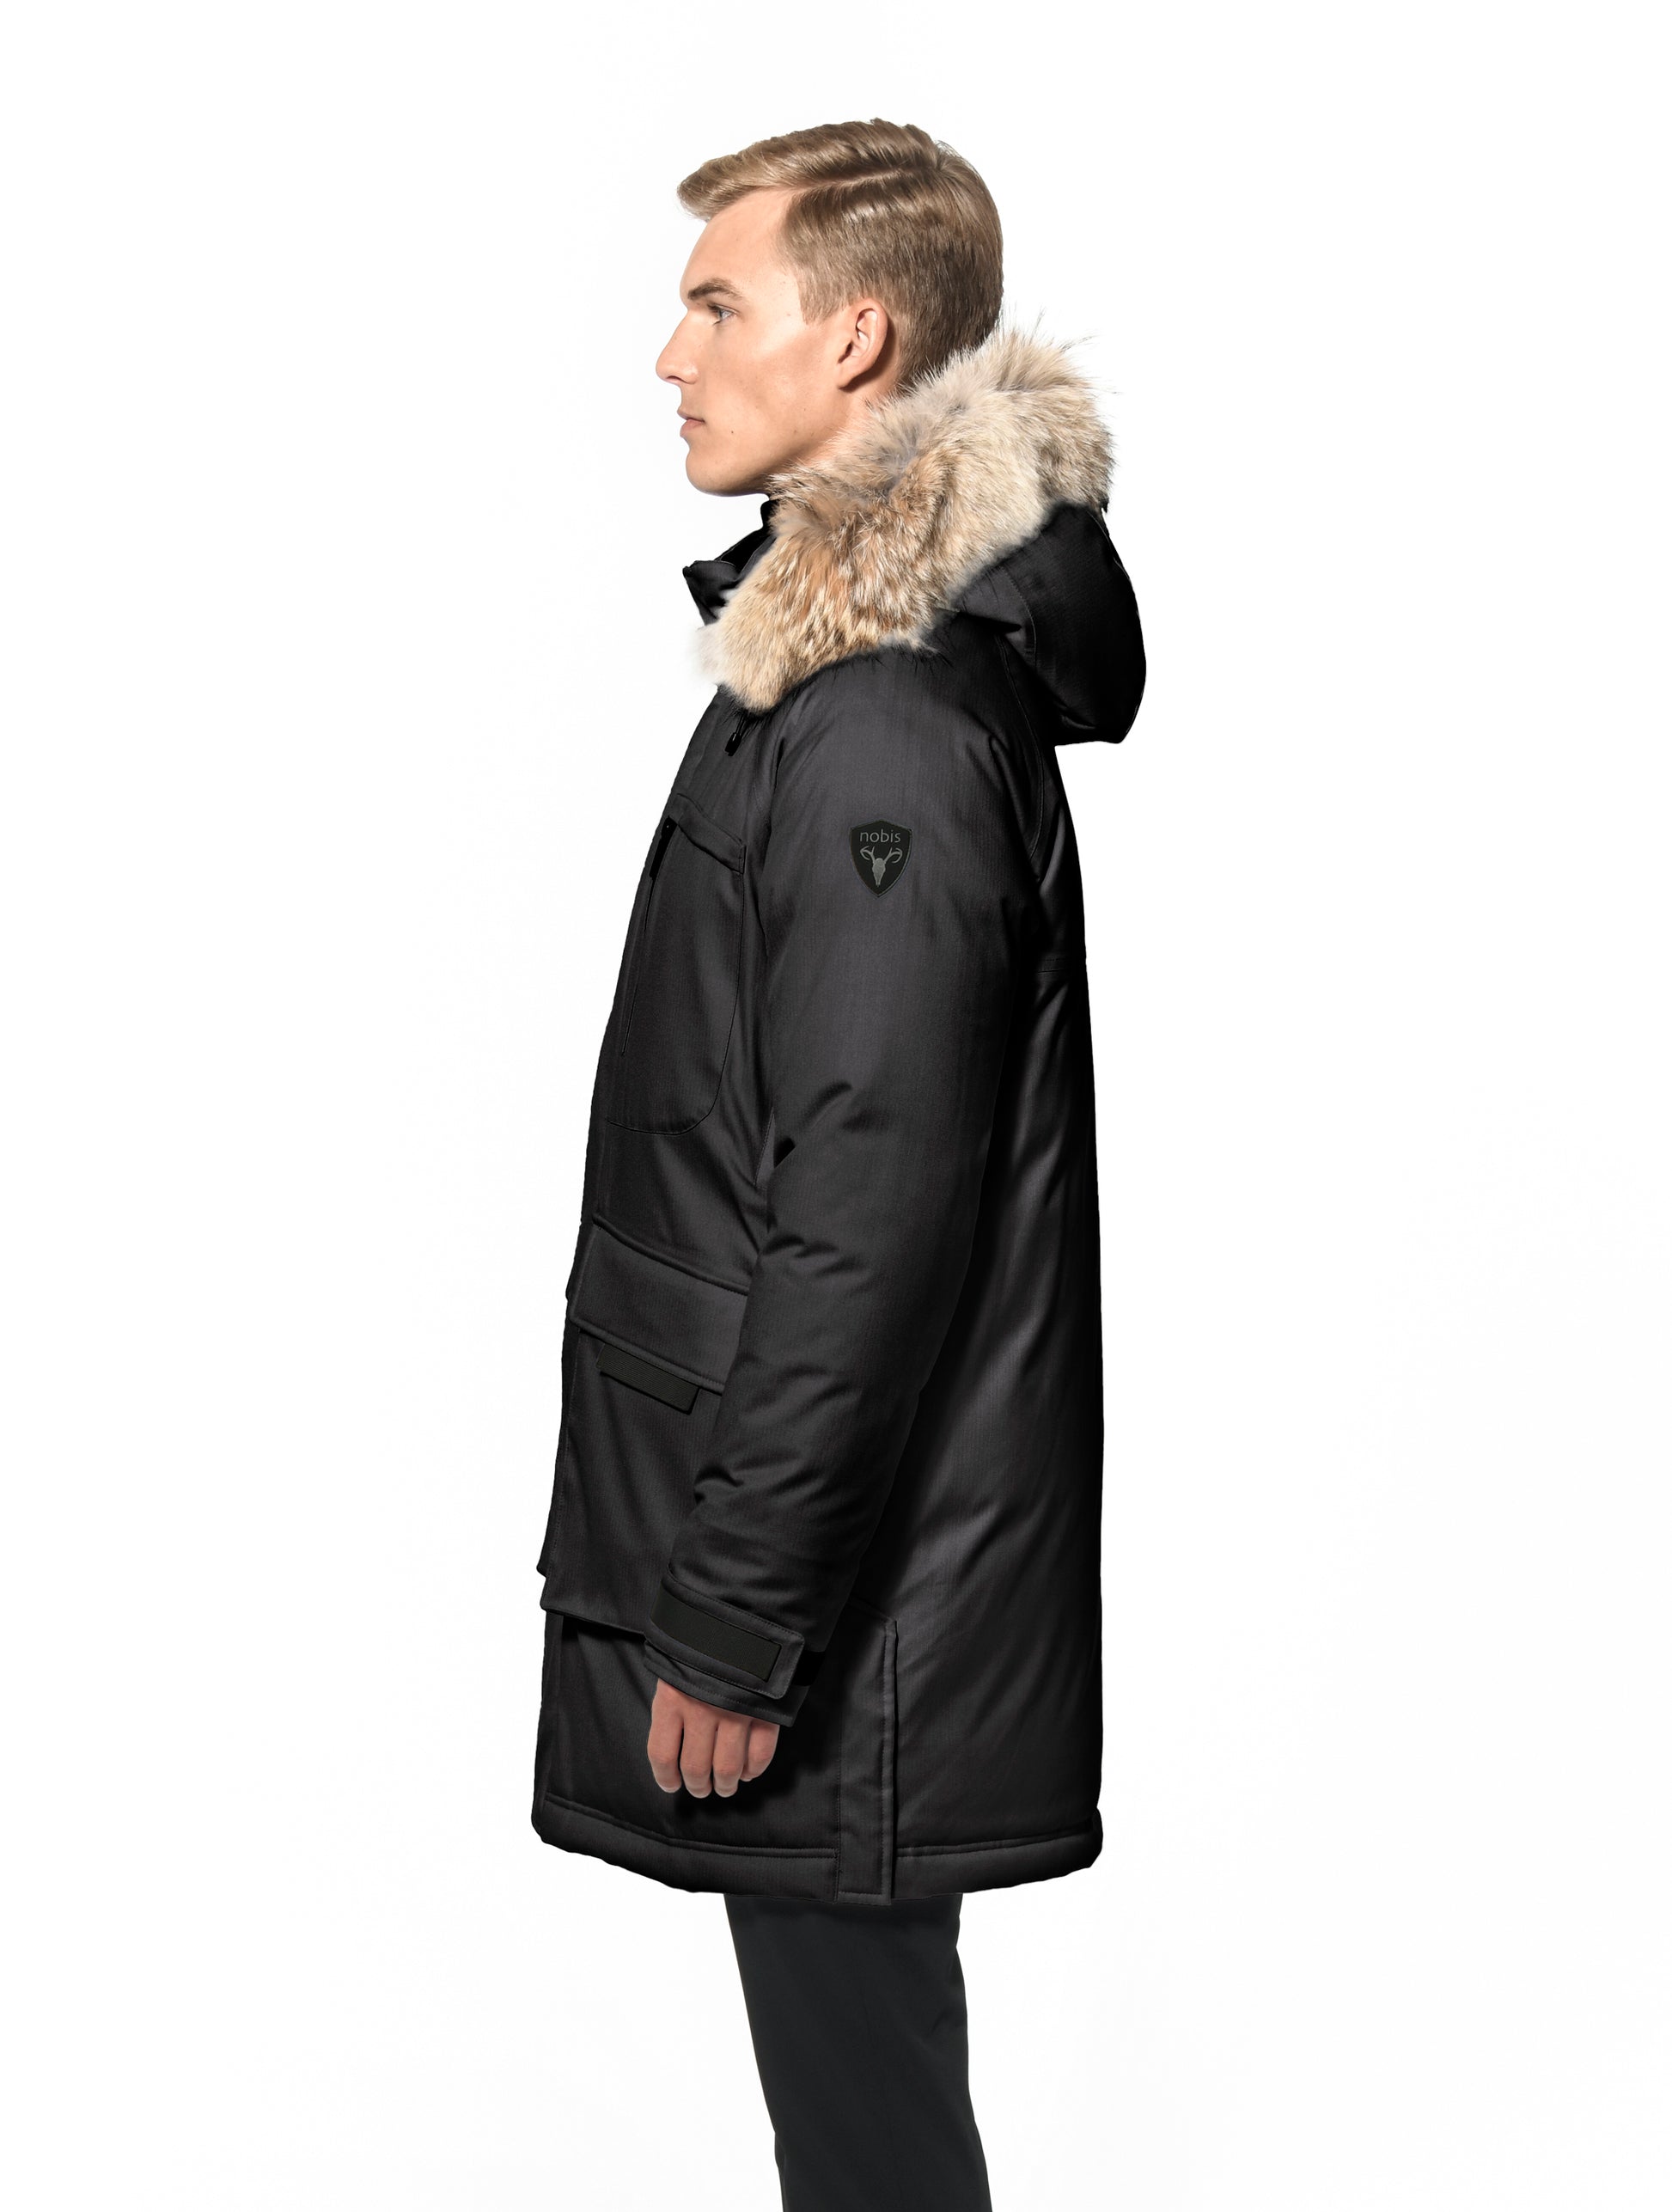 Men's thigh length down-filled parka with removable hood and removable coyote fur trim in Black